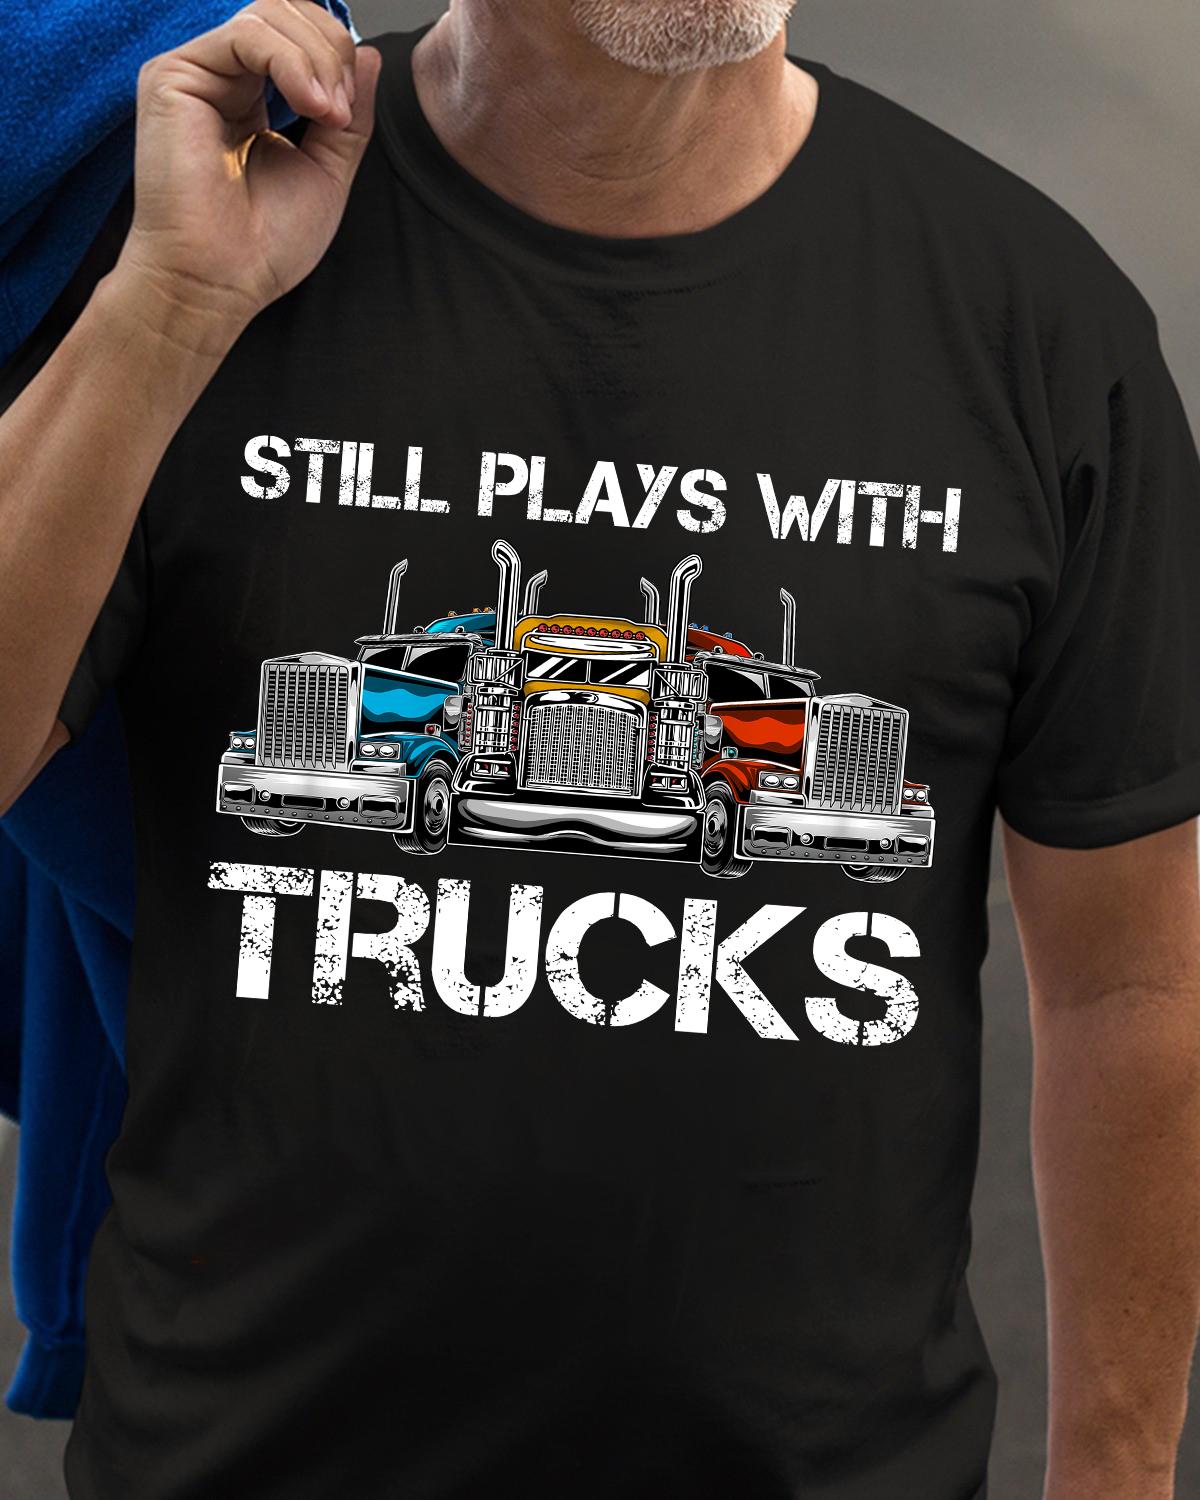 Truck Graphic T-shirt, Truck Driver - Still plays with trucks